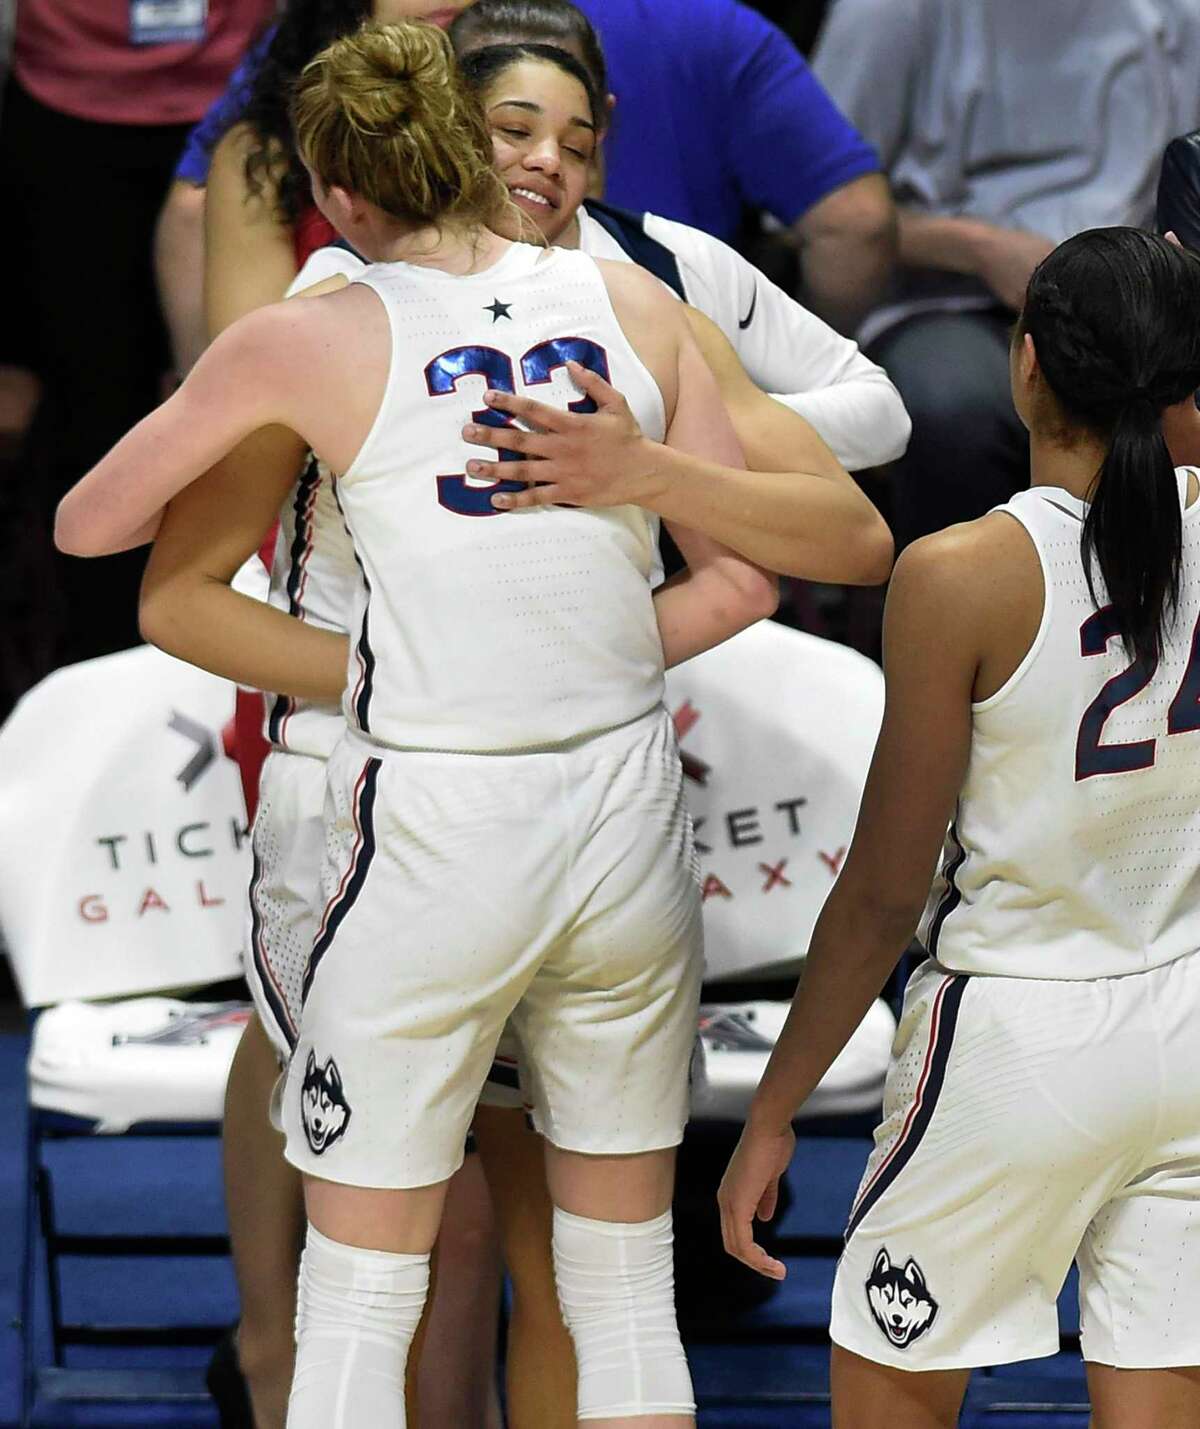 UConn’s Katie Lou Samuelson (33) embraces teammate Gabby Williams at the end an NCAA college basketball game in the American Athletic Conference women's tournament final at Mohegan Sun Arena, Tuesday, March 6, 2018, in Uncasville, Conn.